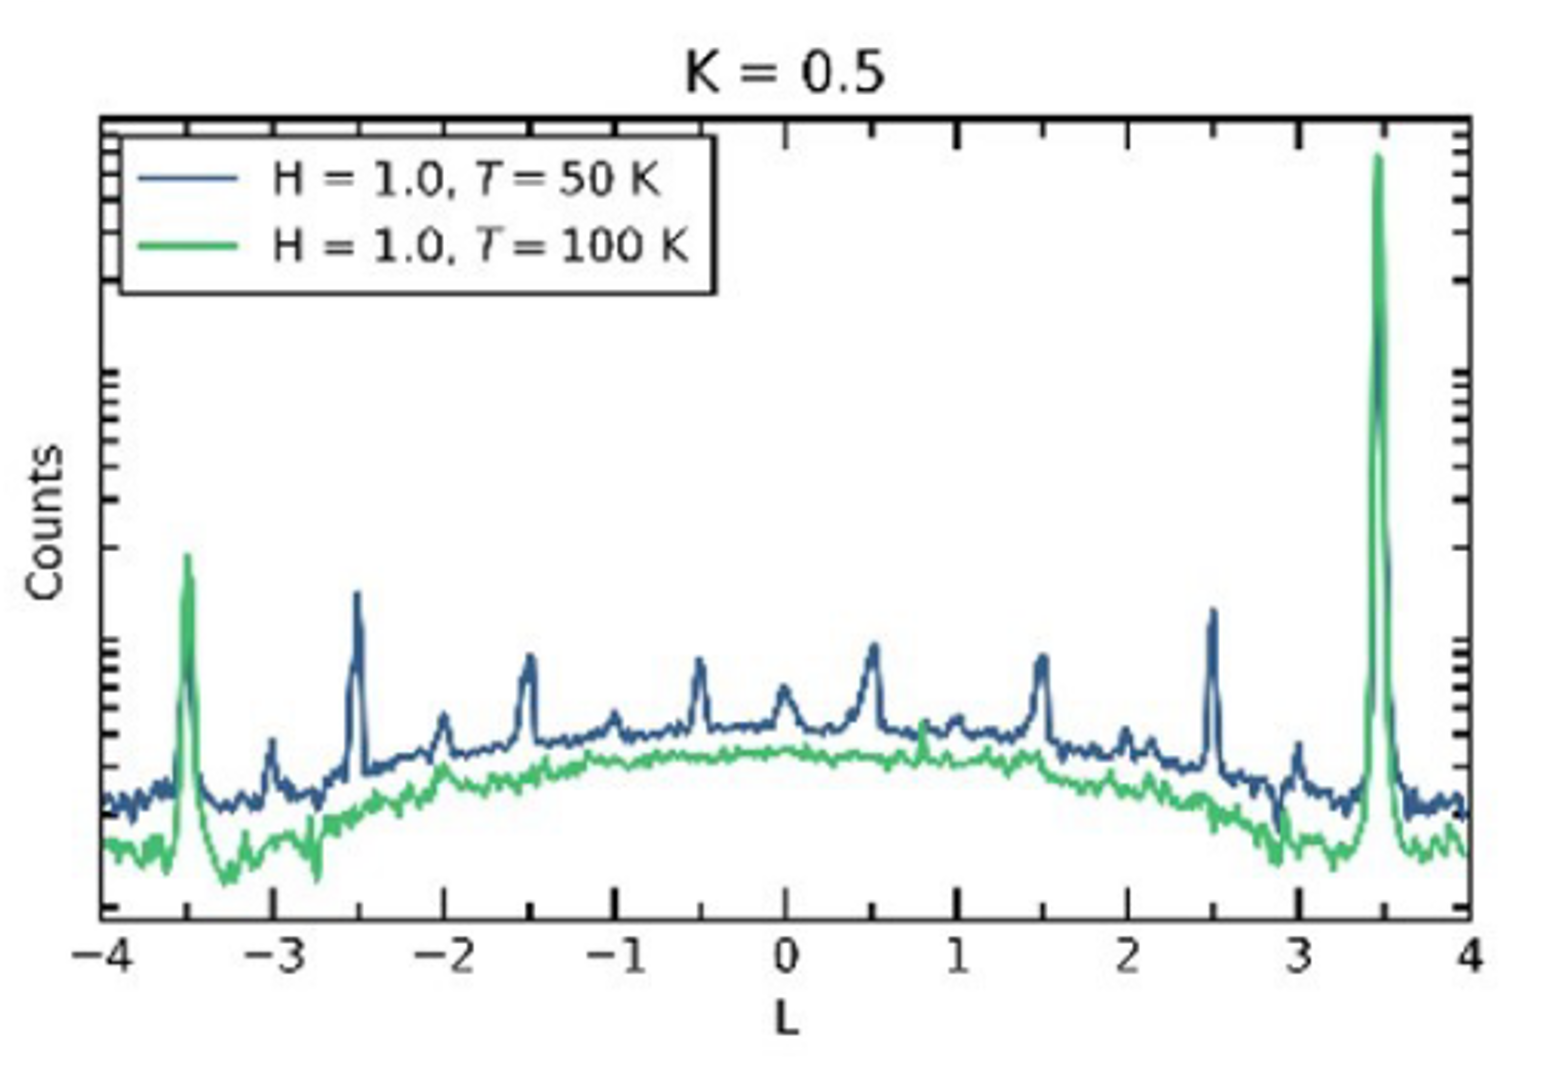 Image shows a graph of chiral CDW peaks. Description in caption